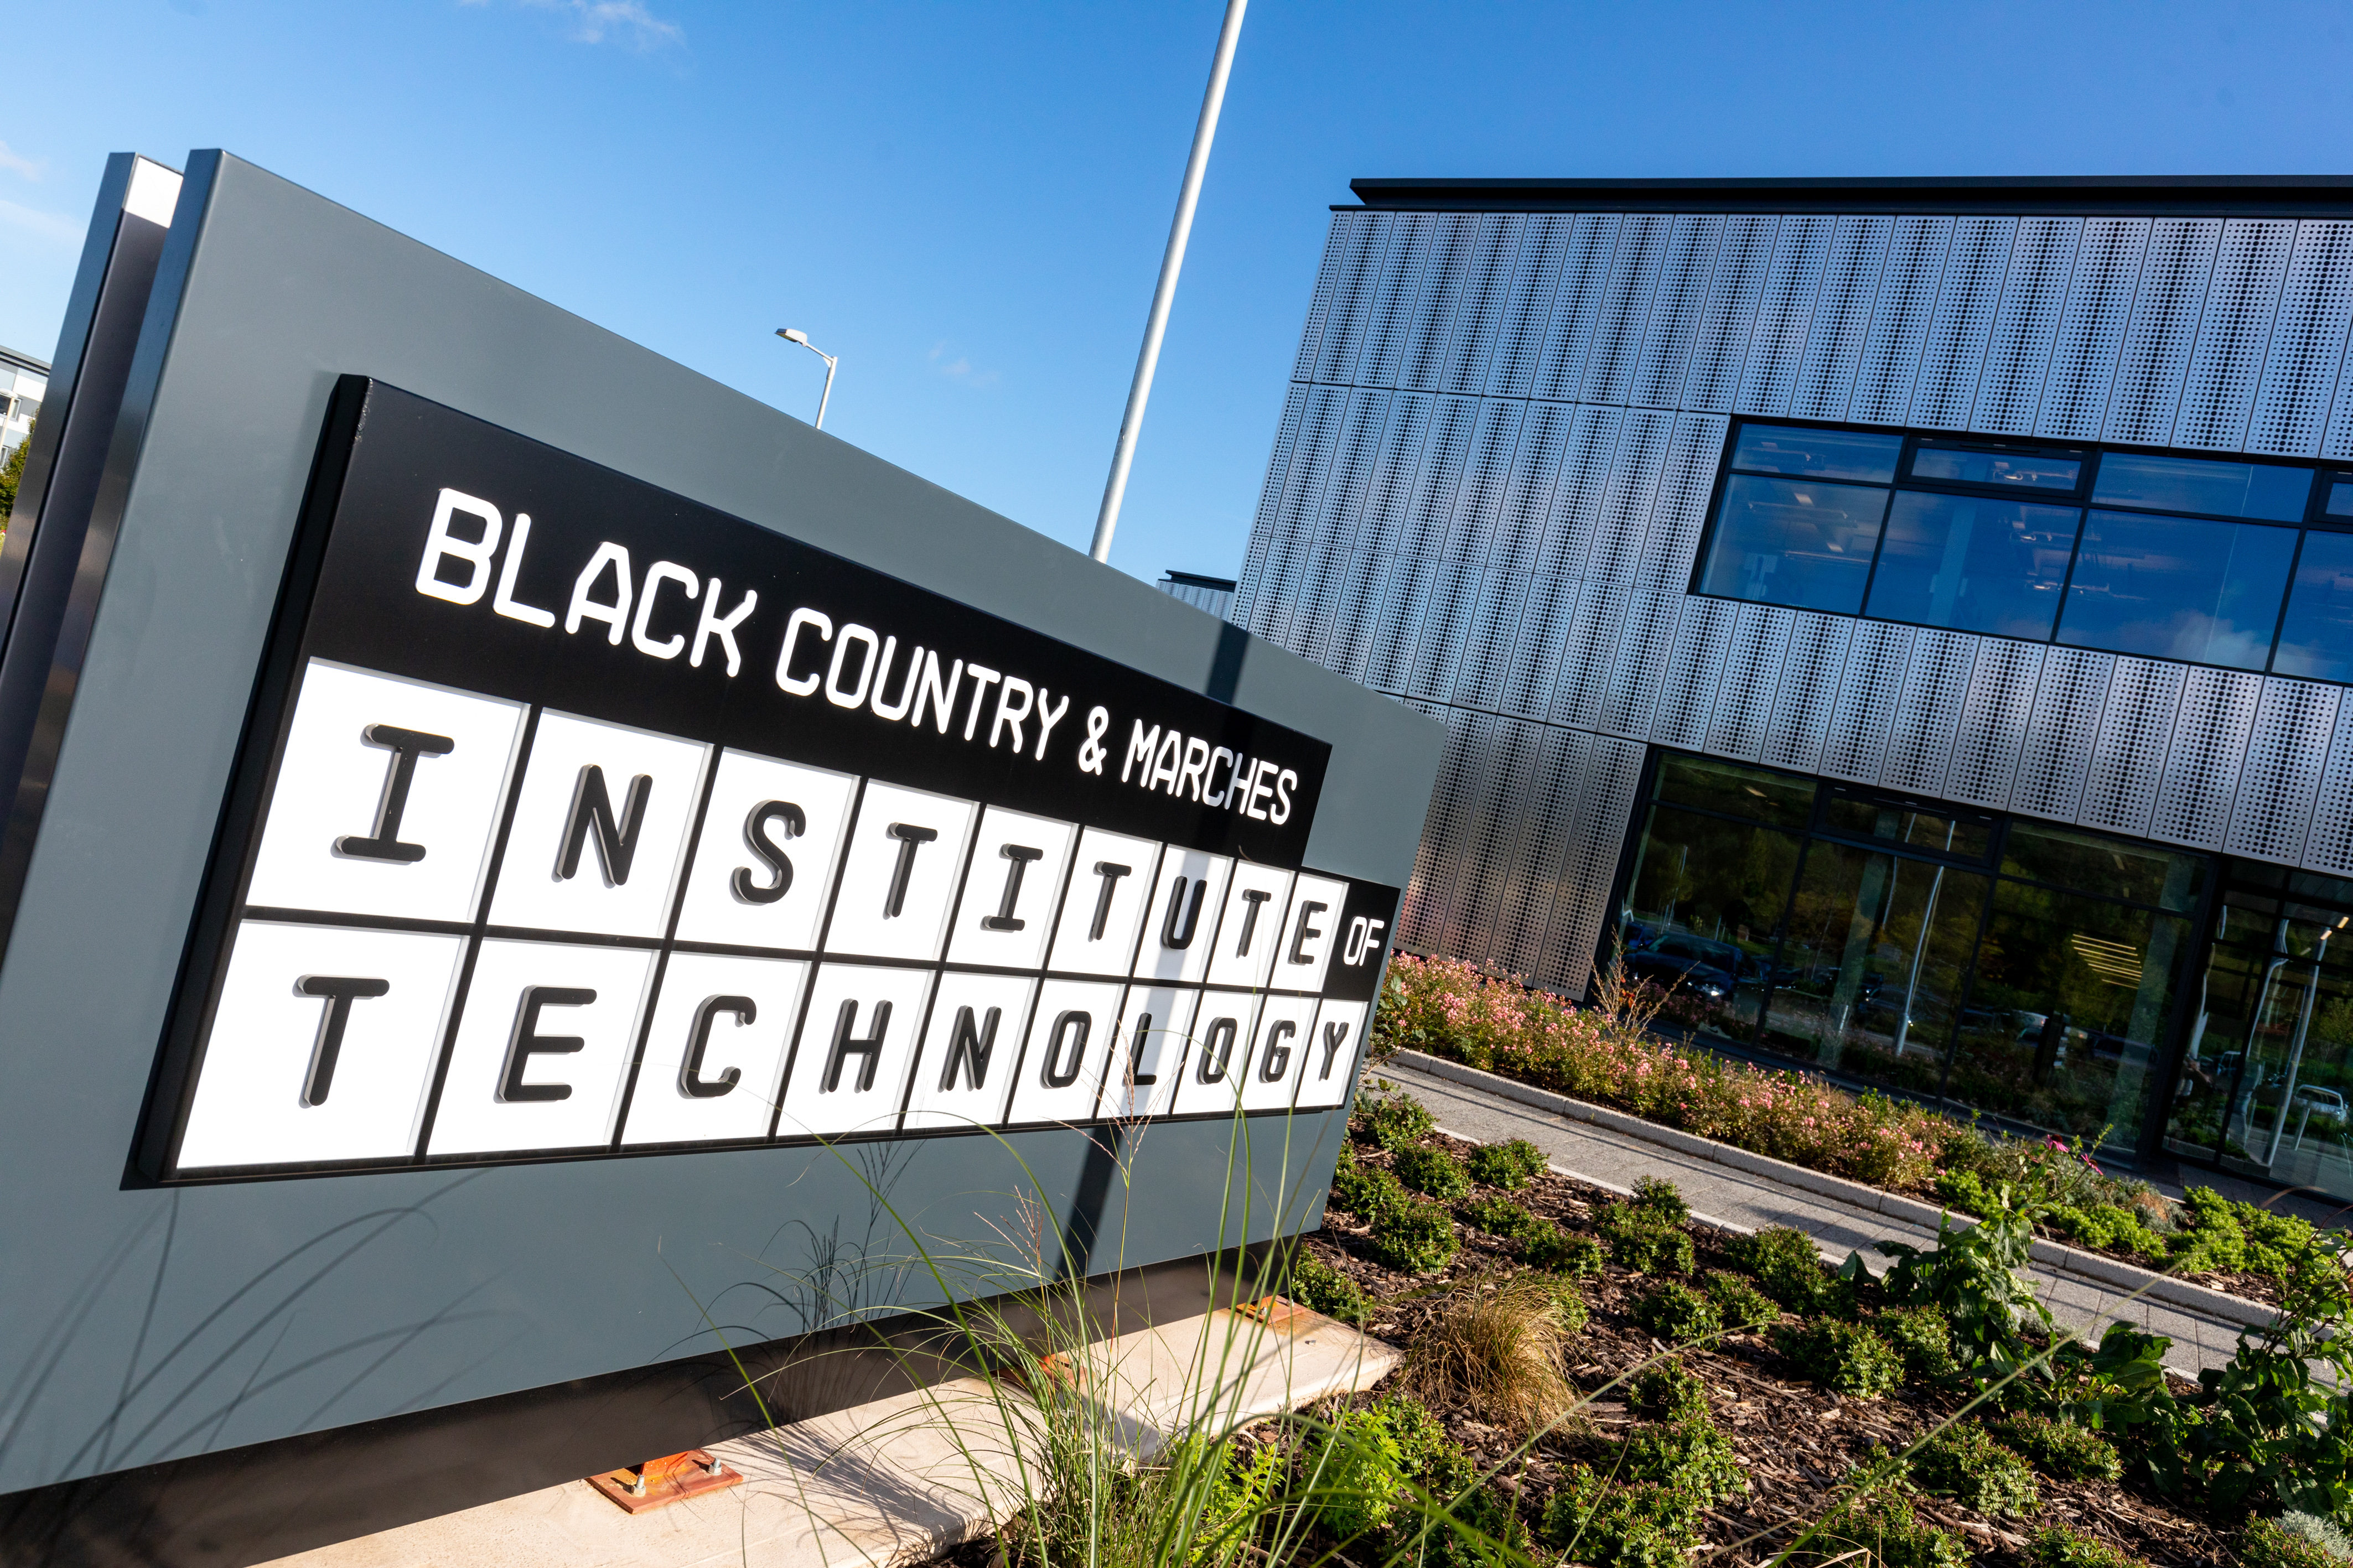 Black Country and Marches Institute of Technology